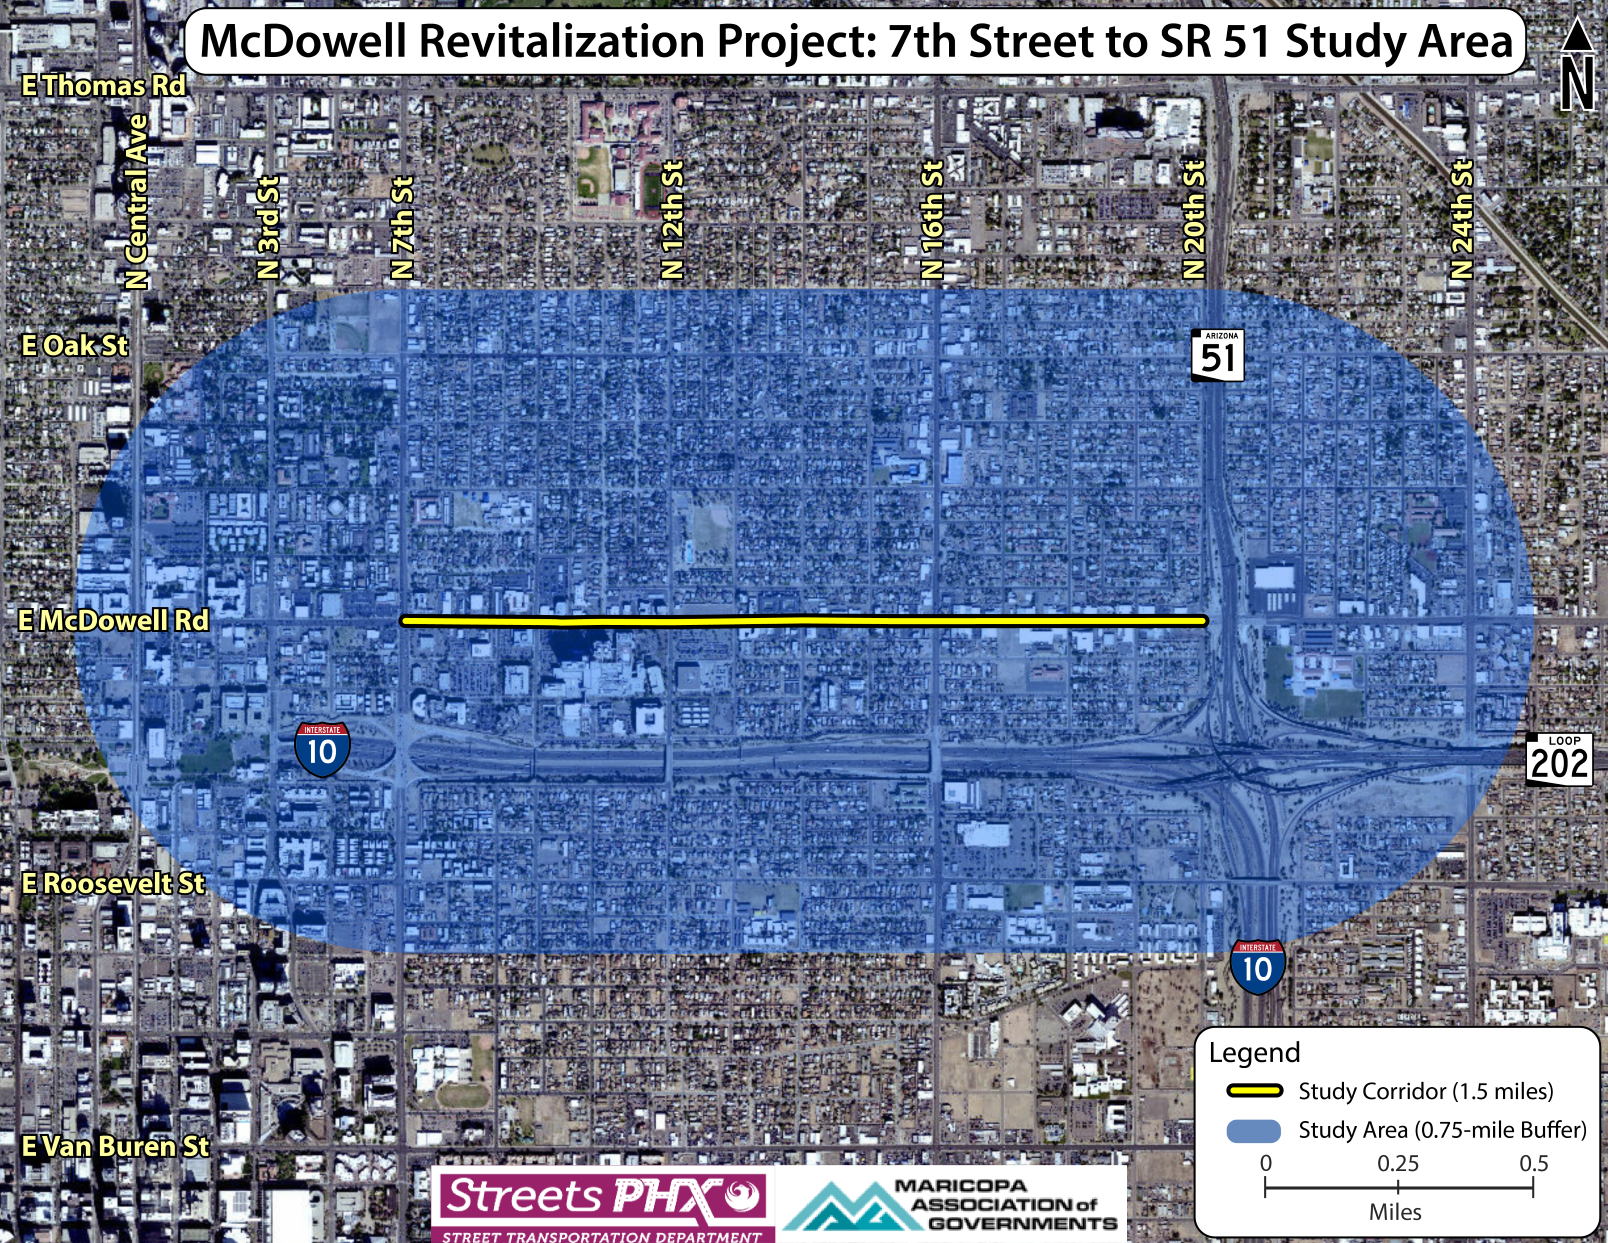 Map of Project Area Extending from 7th St to SR 51